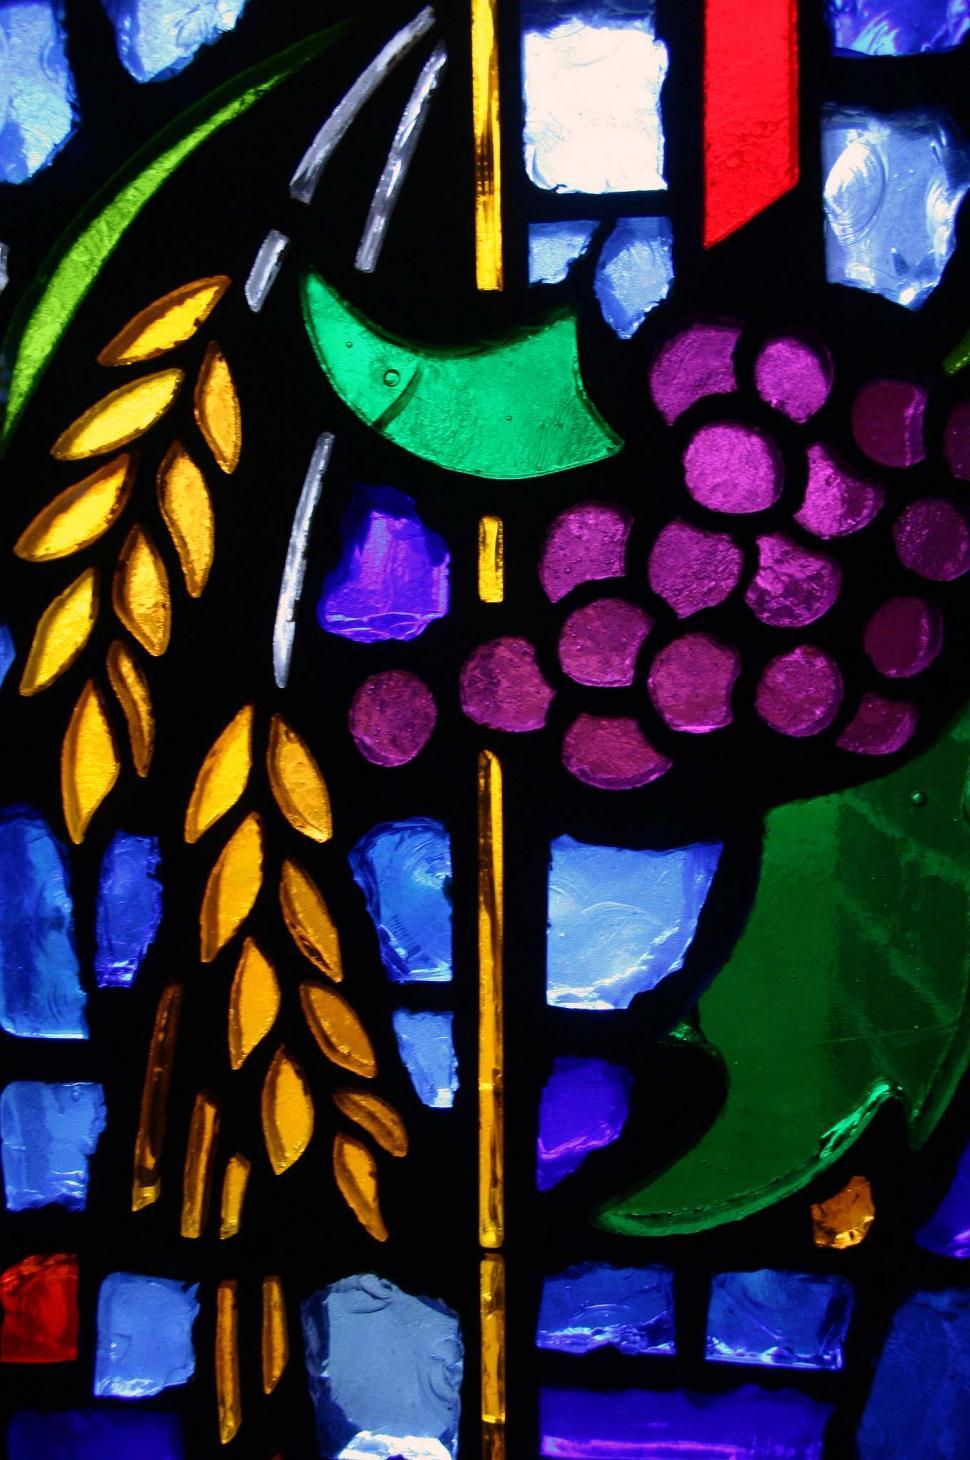 Free Image of Stained Glass 